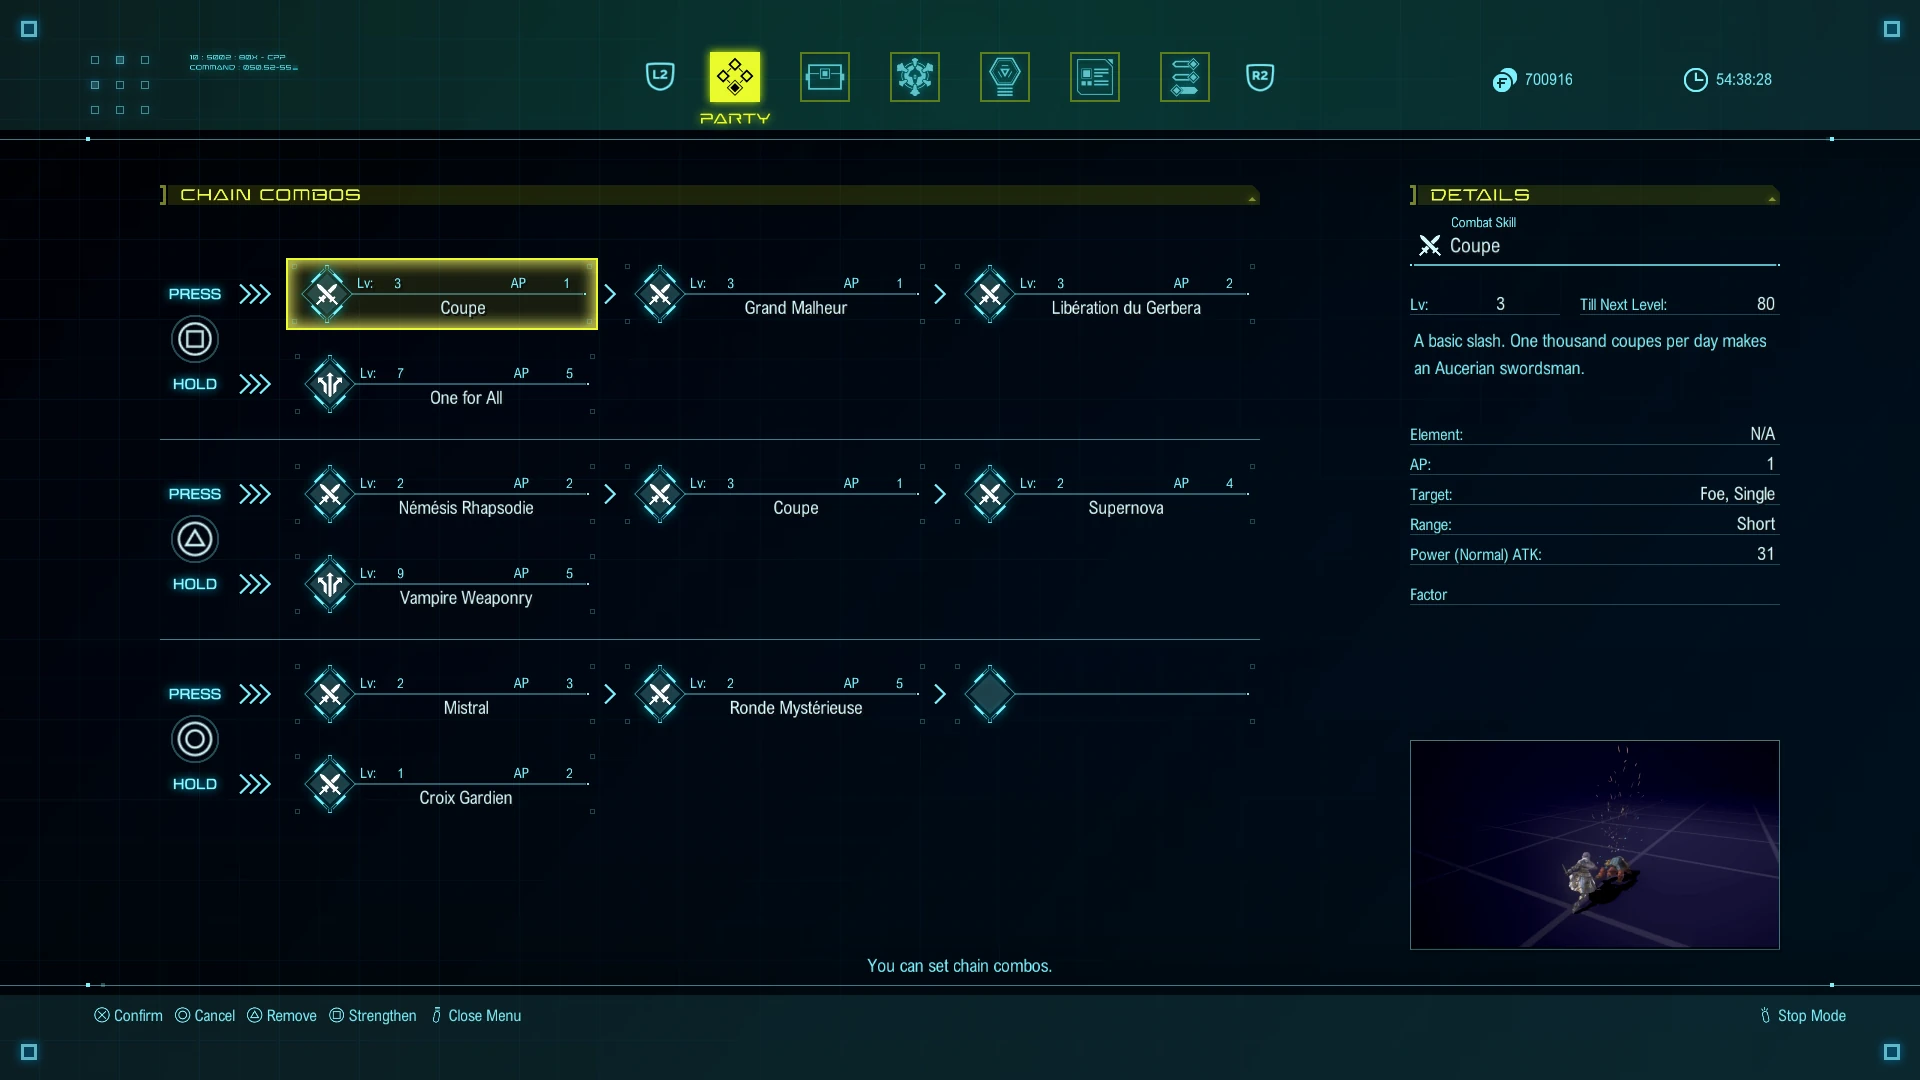 An image of the combo chain customization screen